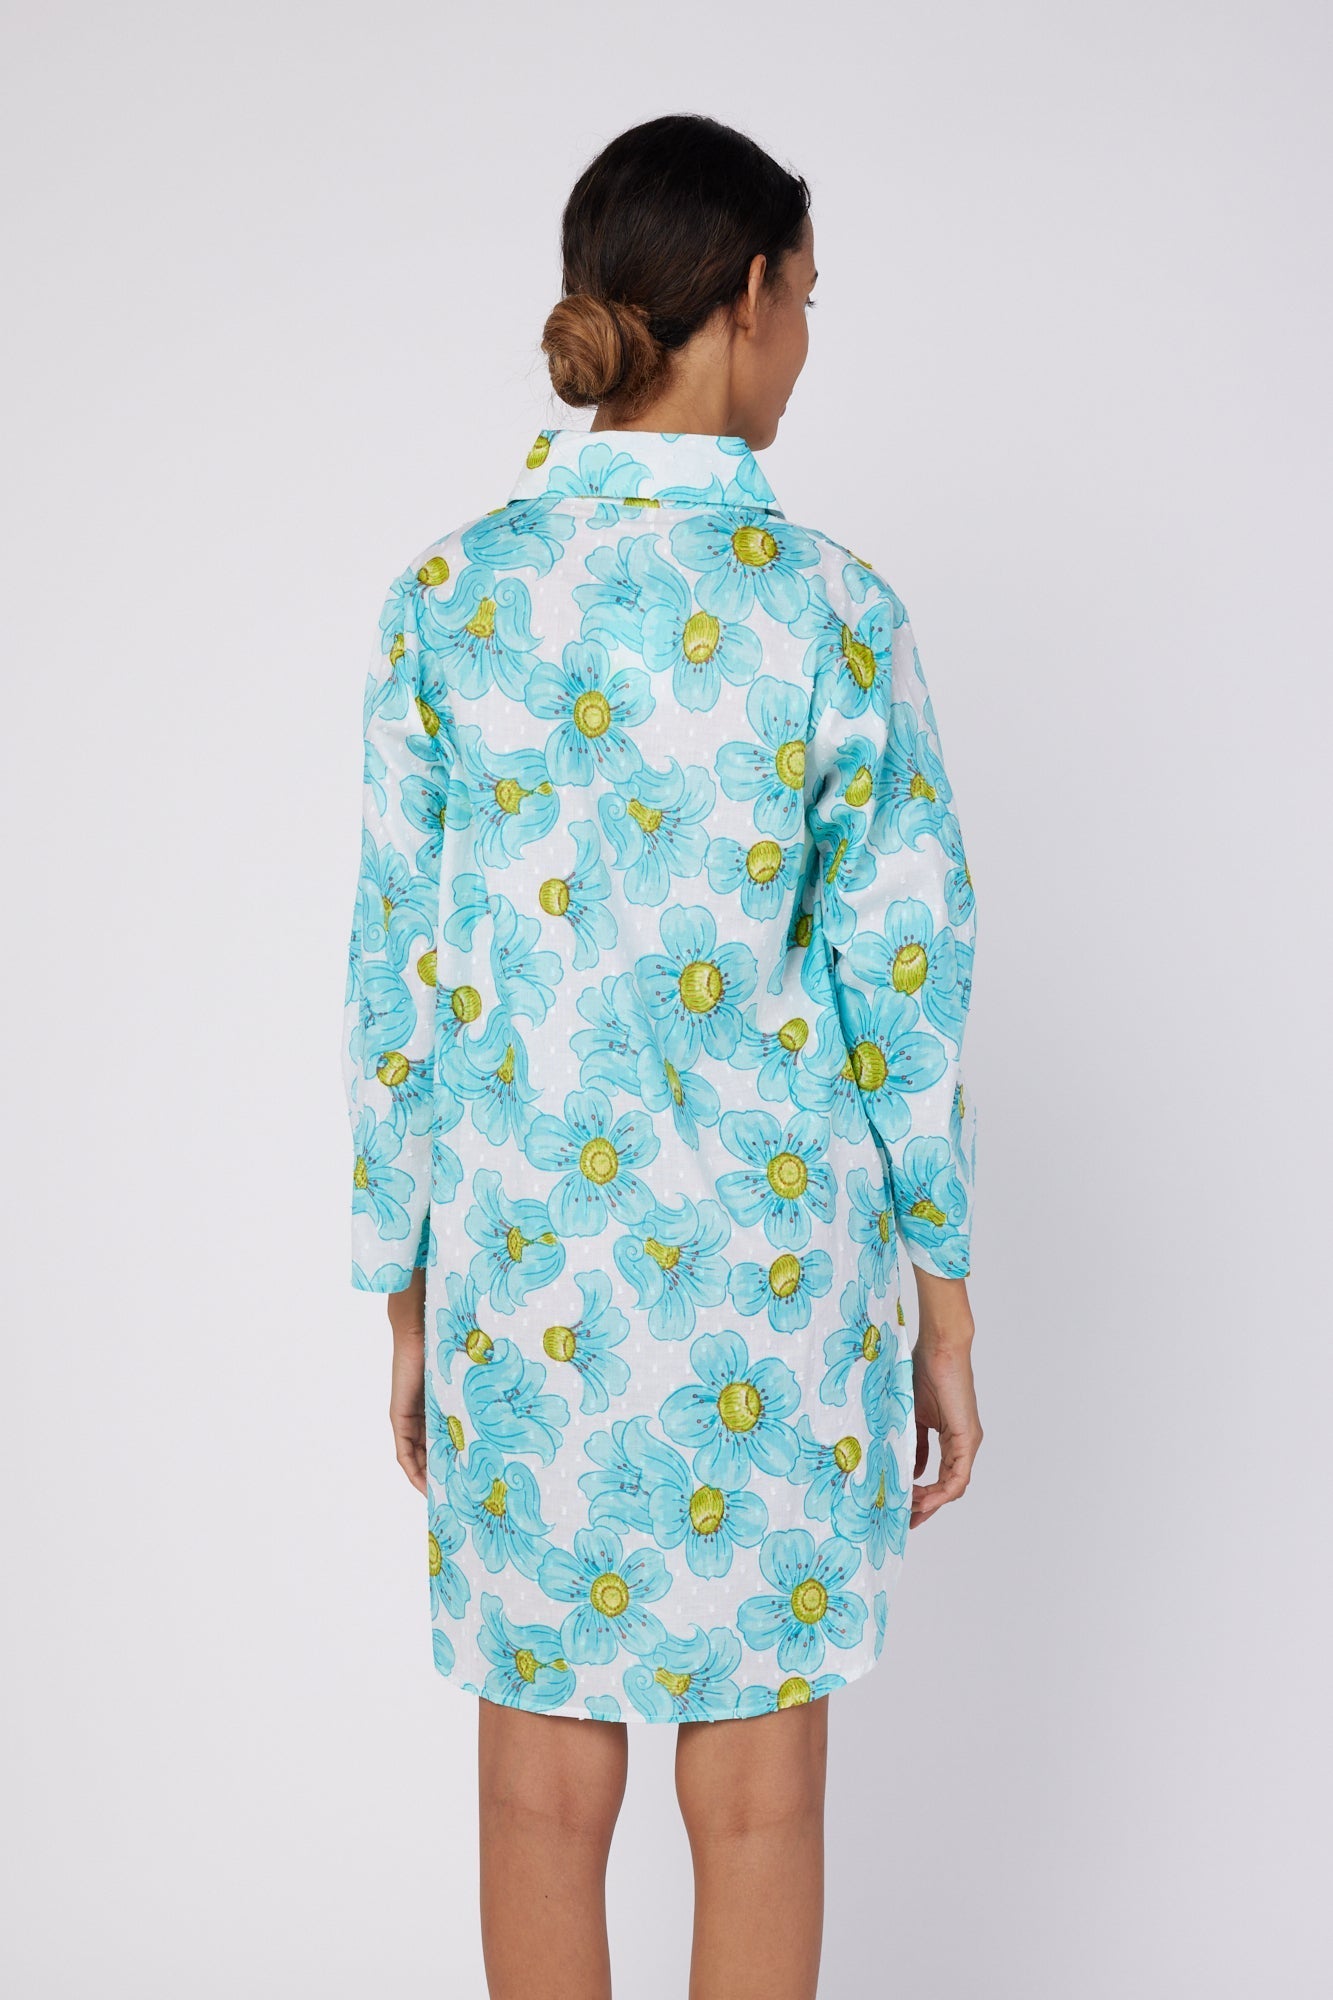 ModaPosa Gabriella 3/4 Sleeve Knee Length Shirt Dress with Collar and Pockets in Blue Floral . Discover women's resort dresses and lifestyle clothing inspired by the Mediterranean. Free worldwide shipping available!